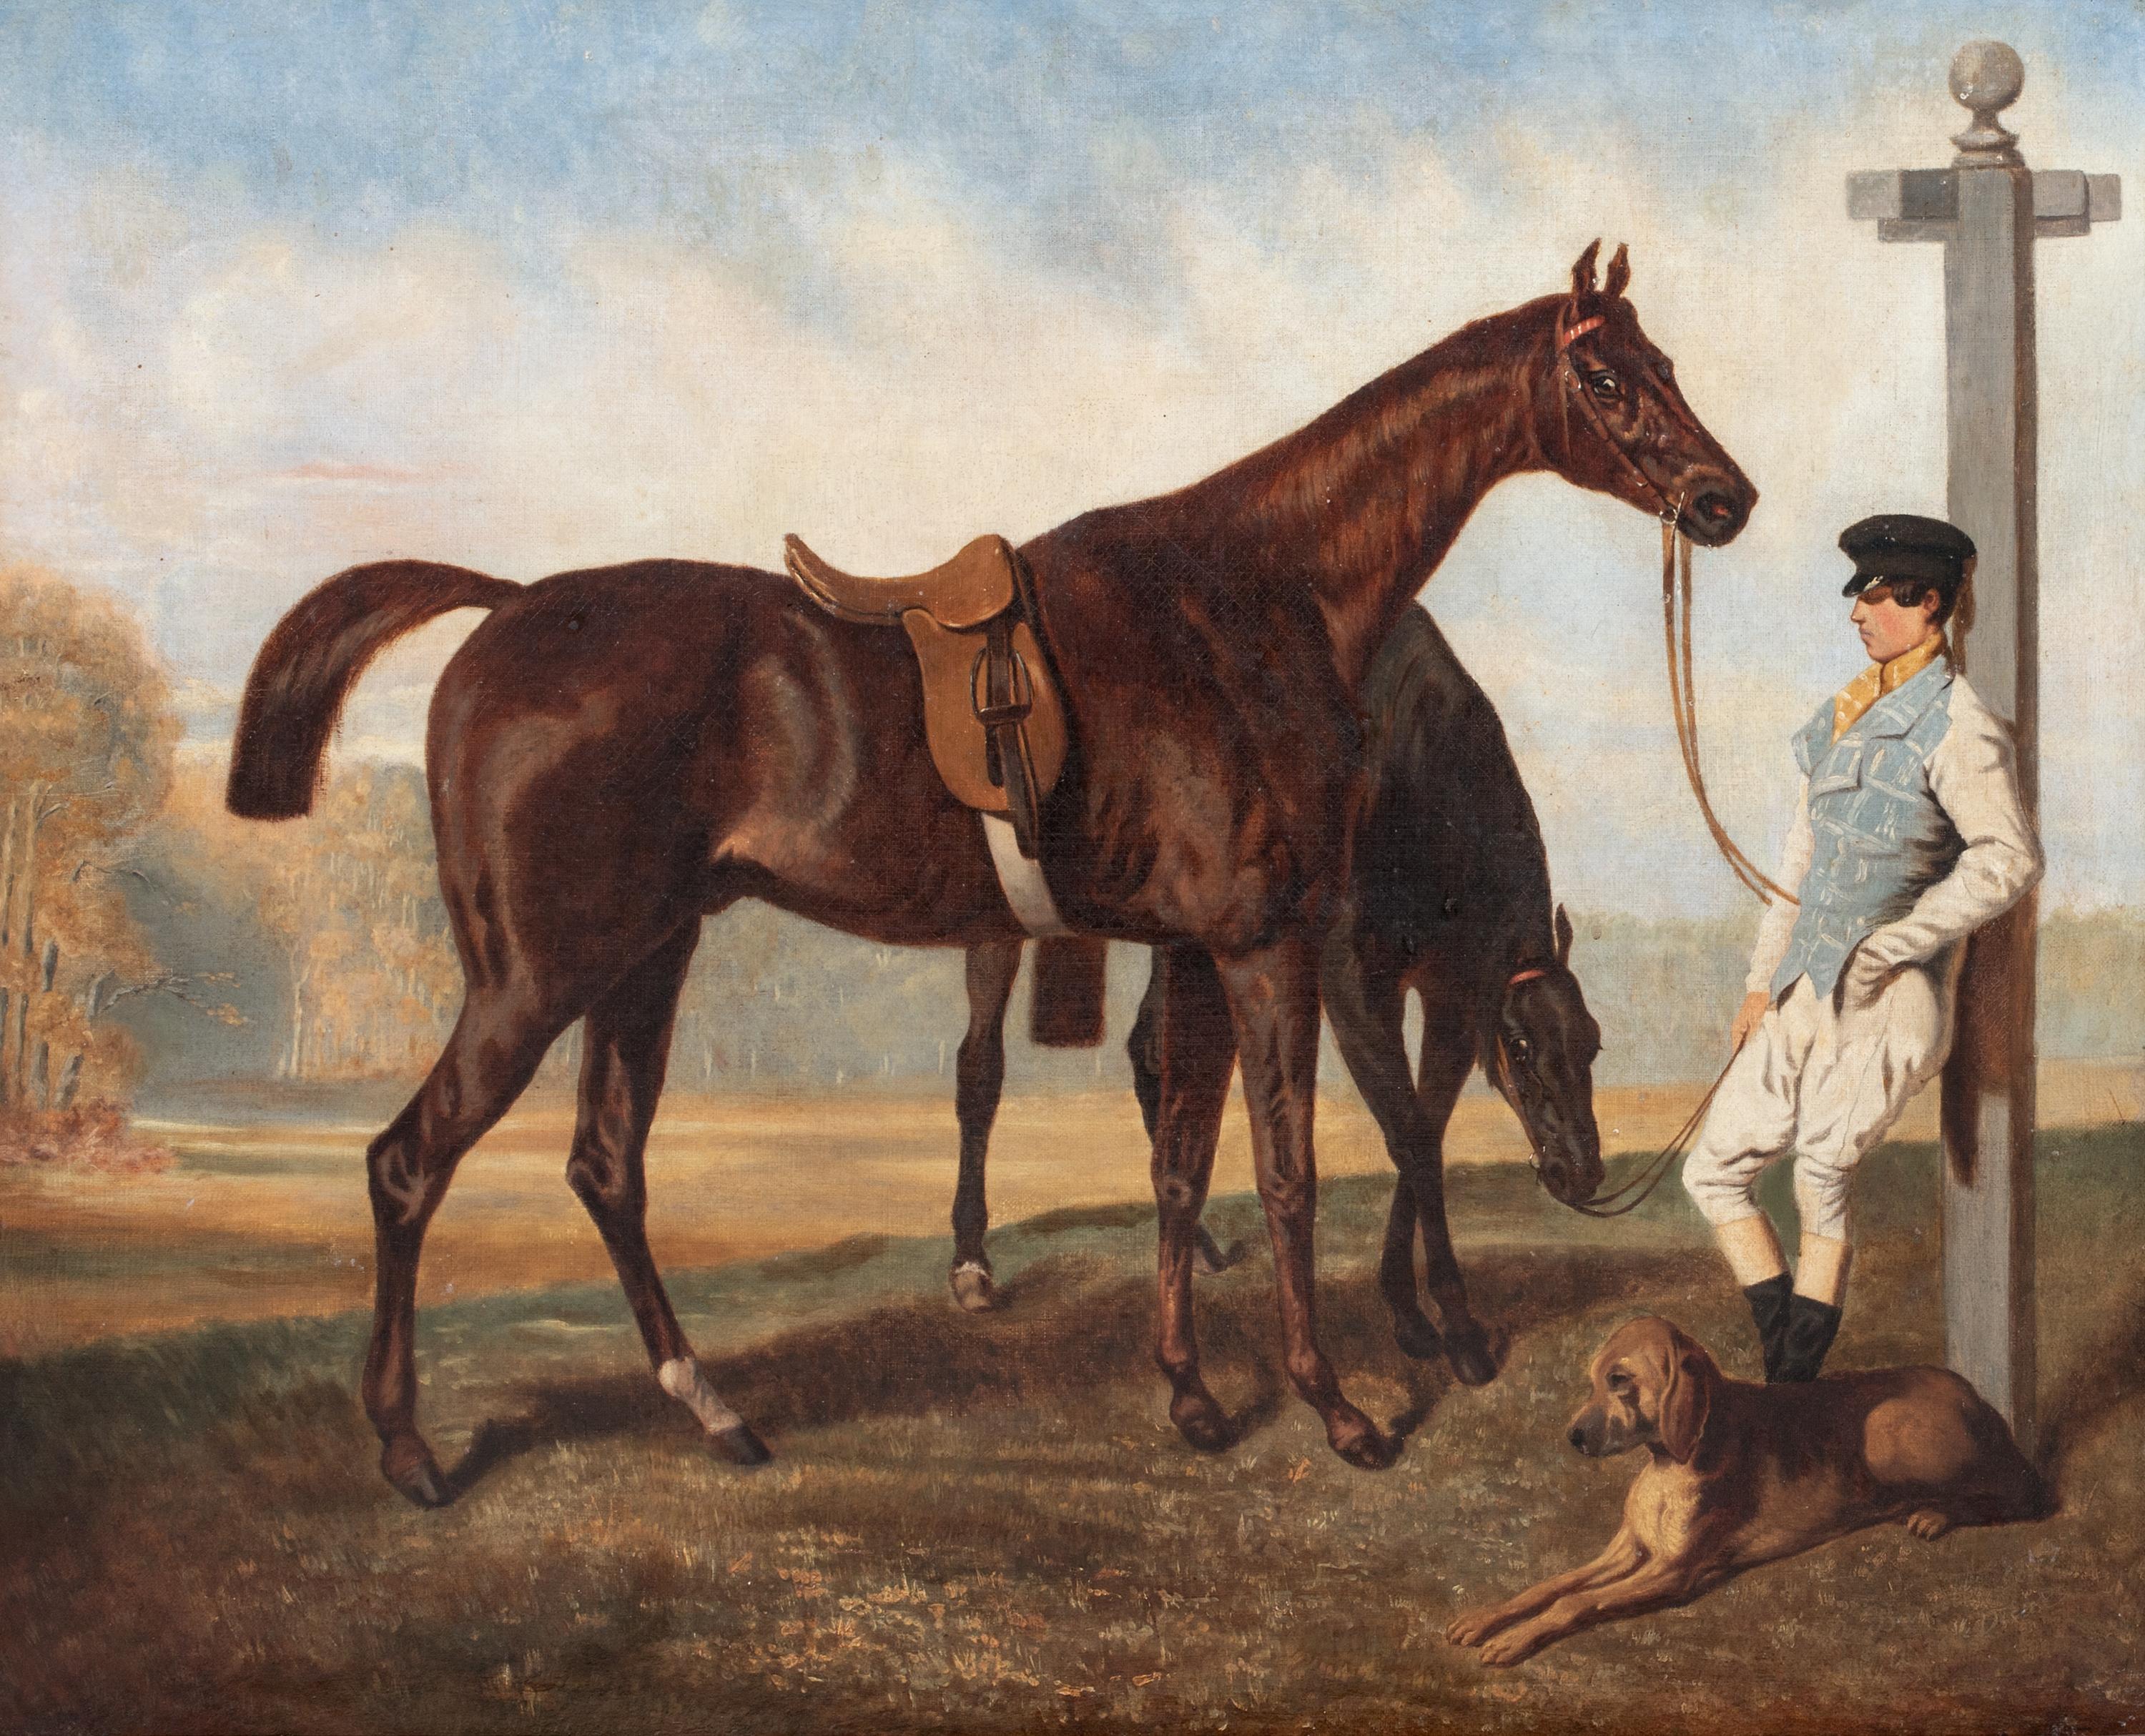 Le Lad Blanc et ses Chevaux, 19th Century

by ALFRED DE DREUX (1810-1860) to $950,000

Large 19th Century portrait of a young groom and horses by a signpost, oil on canvas by Alfred De Dreux. Excellent quality and. condition example of the French